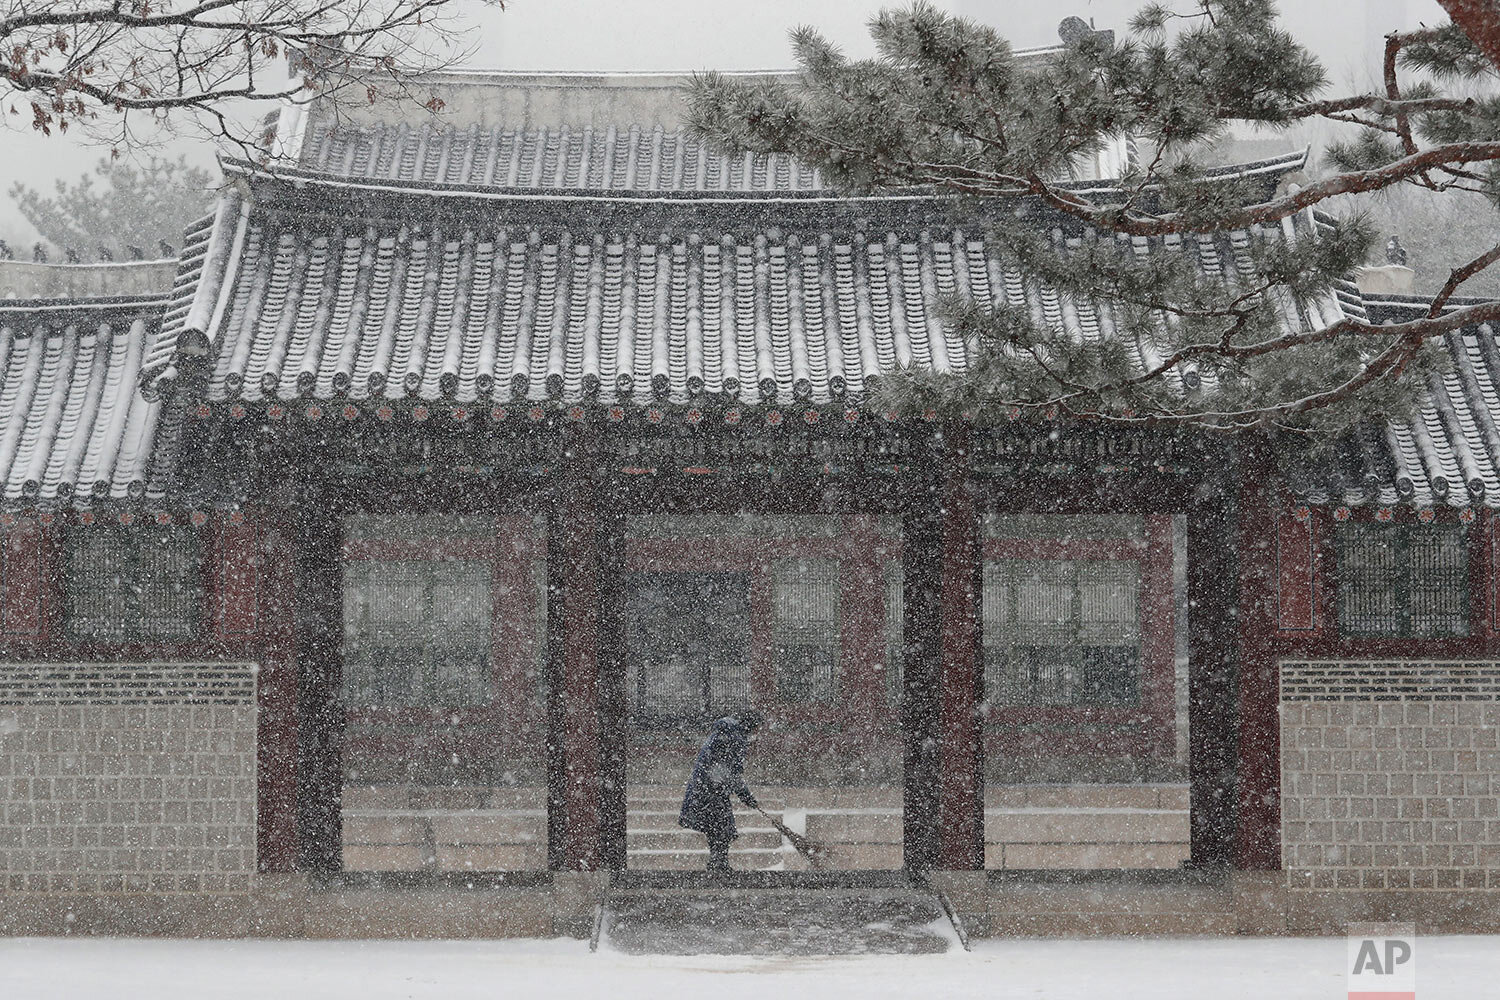  A worker wearing a face mask as a precaution against the coronavirus sweeps snow off the walkways with a broom at the Deoksu Palace in Seoul, South Korea, Tuesday, Jan. 12, 2021. (AP Photo/Ahn Young-joon) 